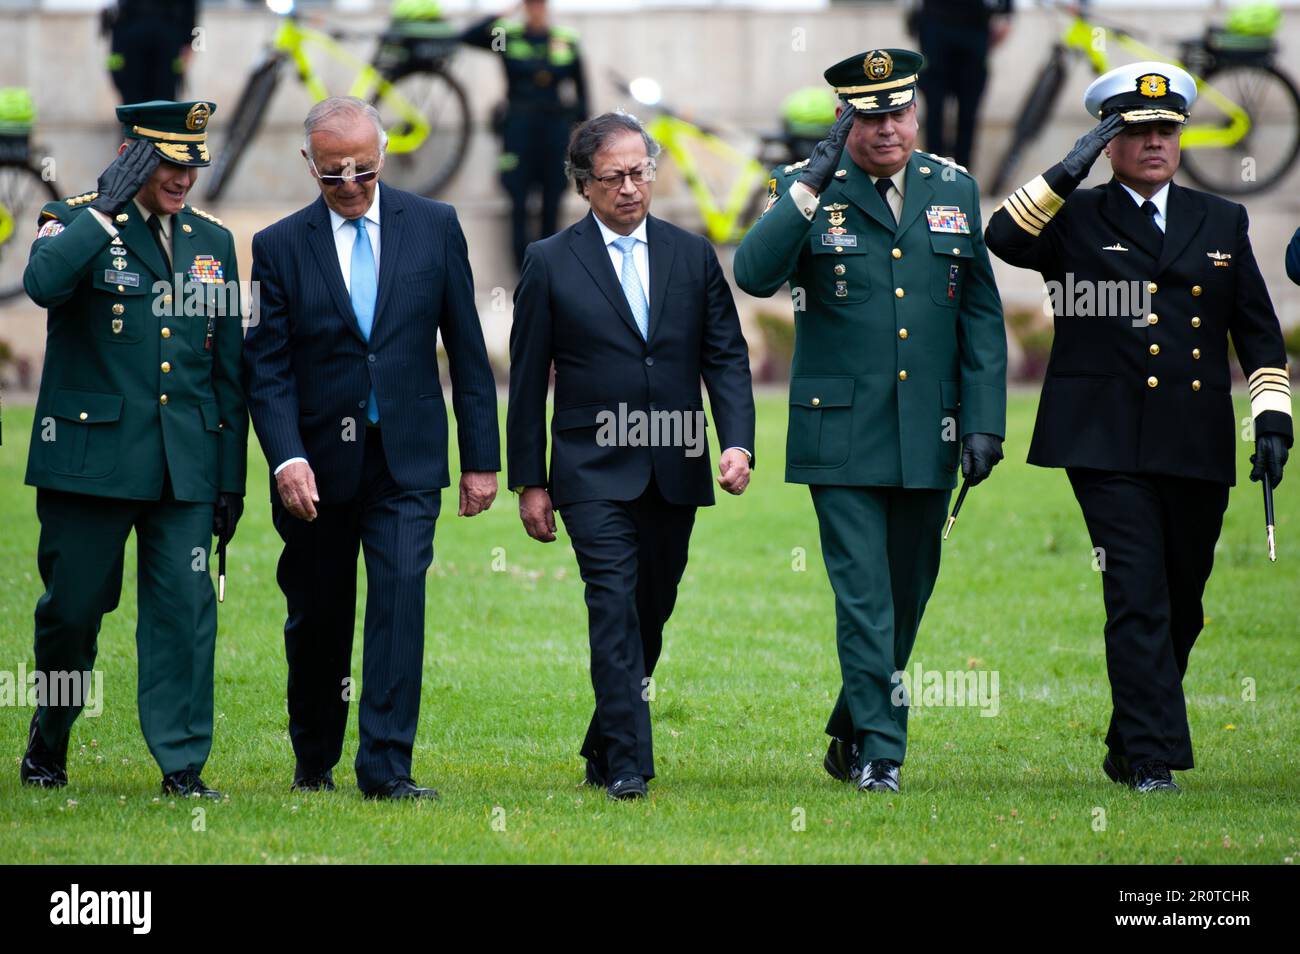 Bogota, Colombia. 09th May, 2023. Colombian president Gustavo Petro marches along miniser of defense Ivan Velasquez and the Joint Chiefs of Staff during the ceremony of the new Colombian Police Director William Rene Salamanca at the General Santander Police Academy in Bogota, Colombia. May 9, 2023. Photo by: Chepa Beltran/Long Visual Press Credit: Long Visual Press/Alamy Live News Stock Photo